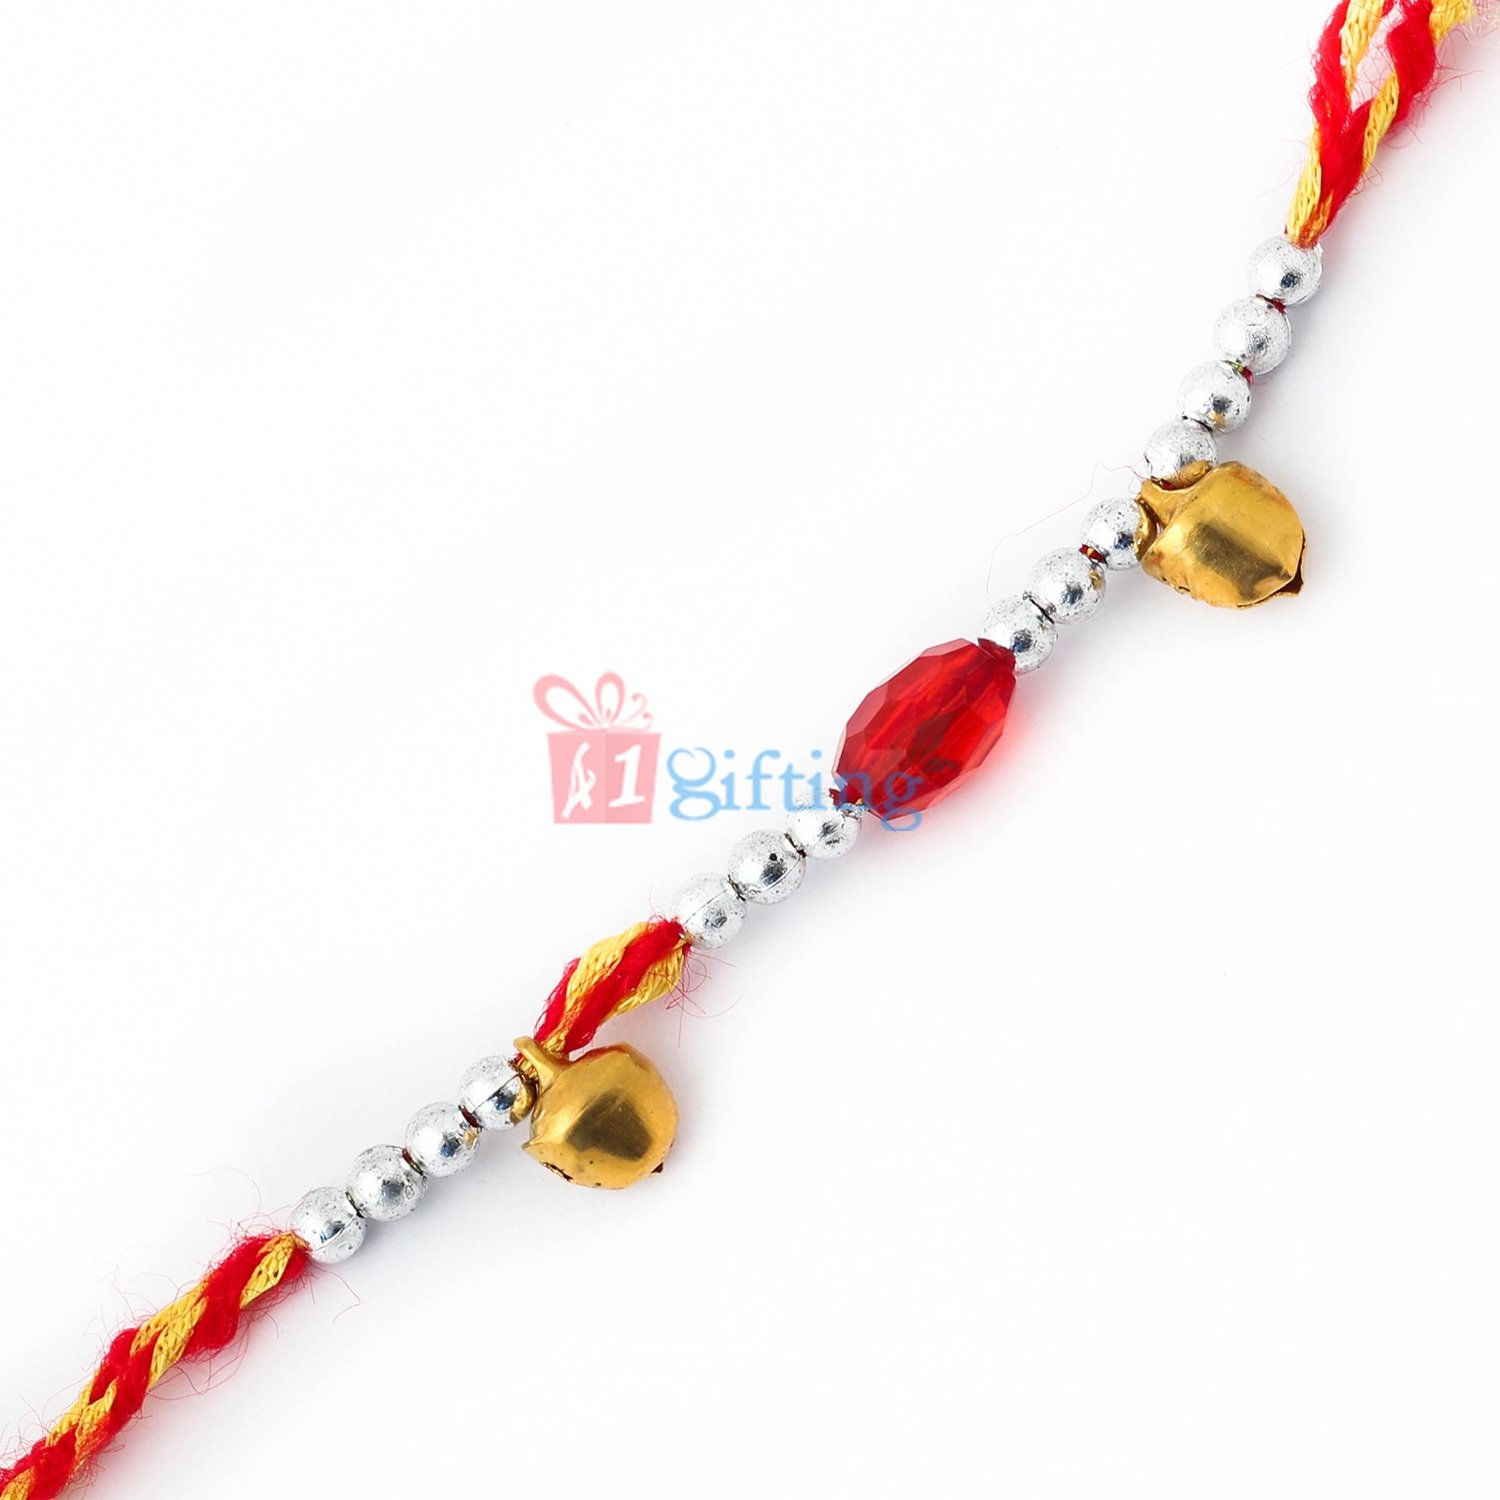 Dazzled mauli Rakhi with ghunghroo and red beads